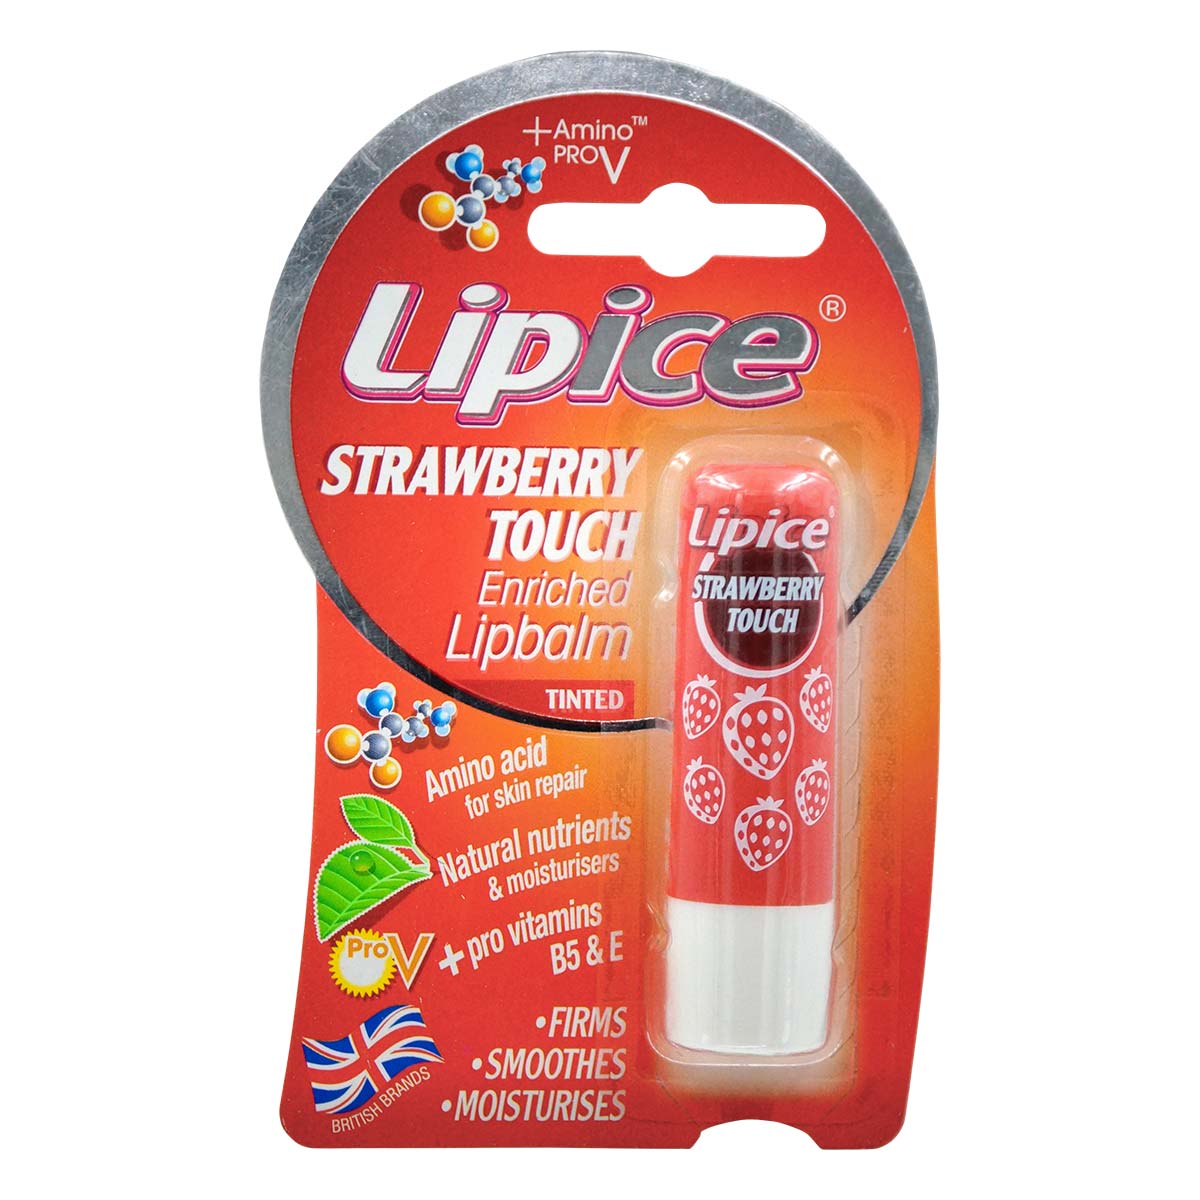 Lipice Strawberry Touch enriched Lipbalm 10ml-p_2